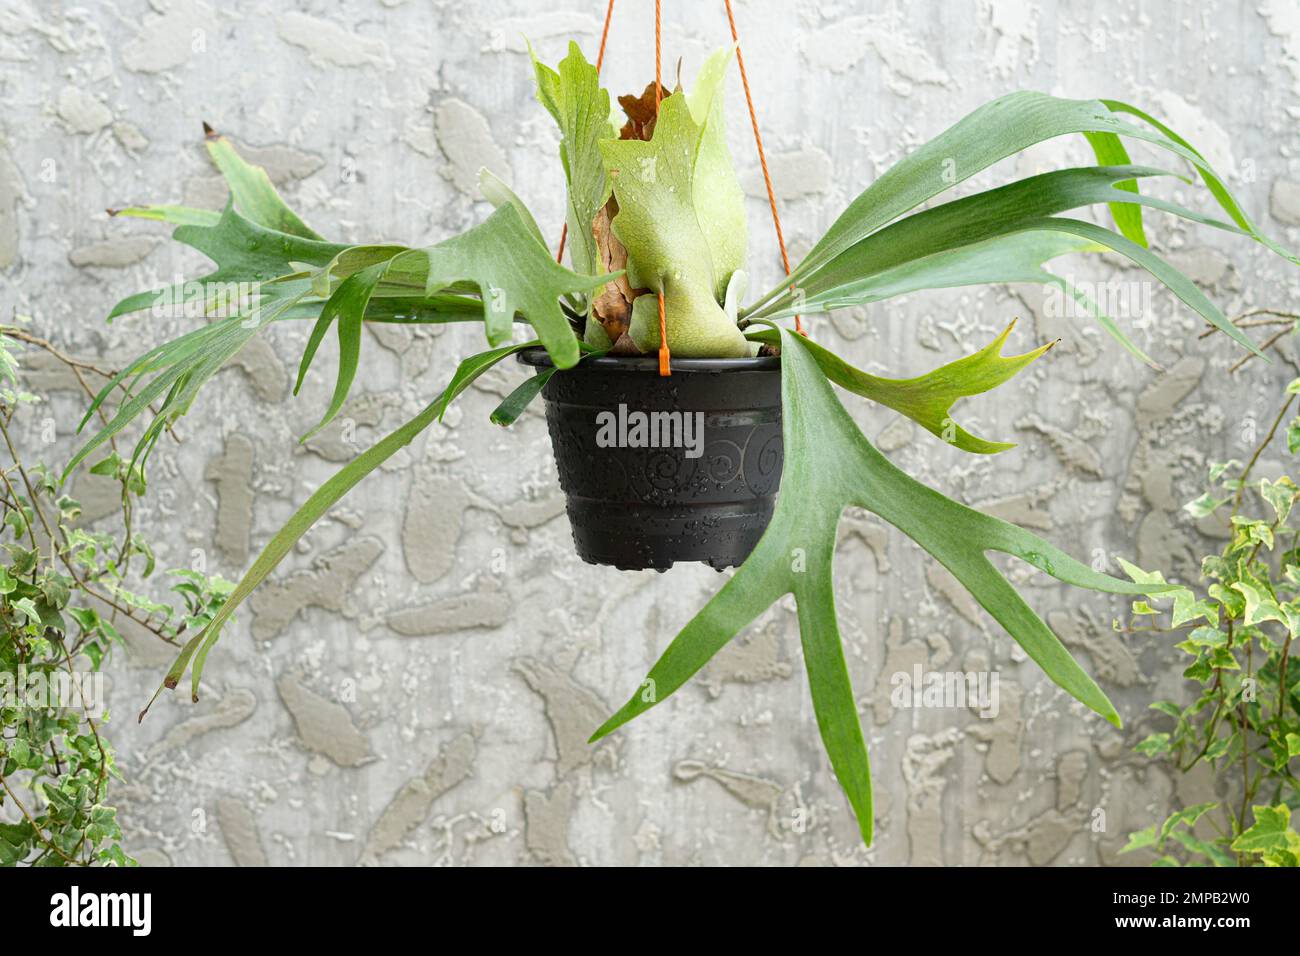 Elkhorn fern on hanging pot with gray concrete background Stock Photo